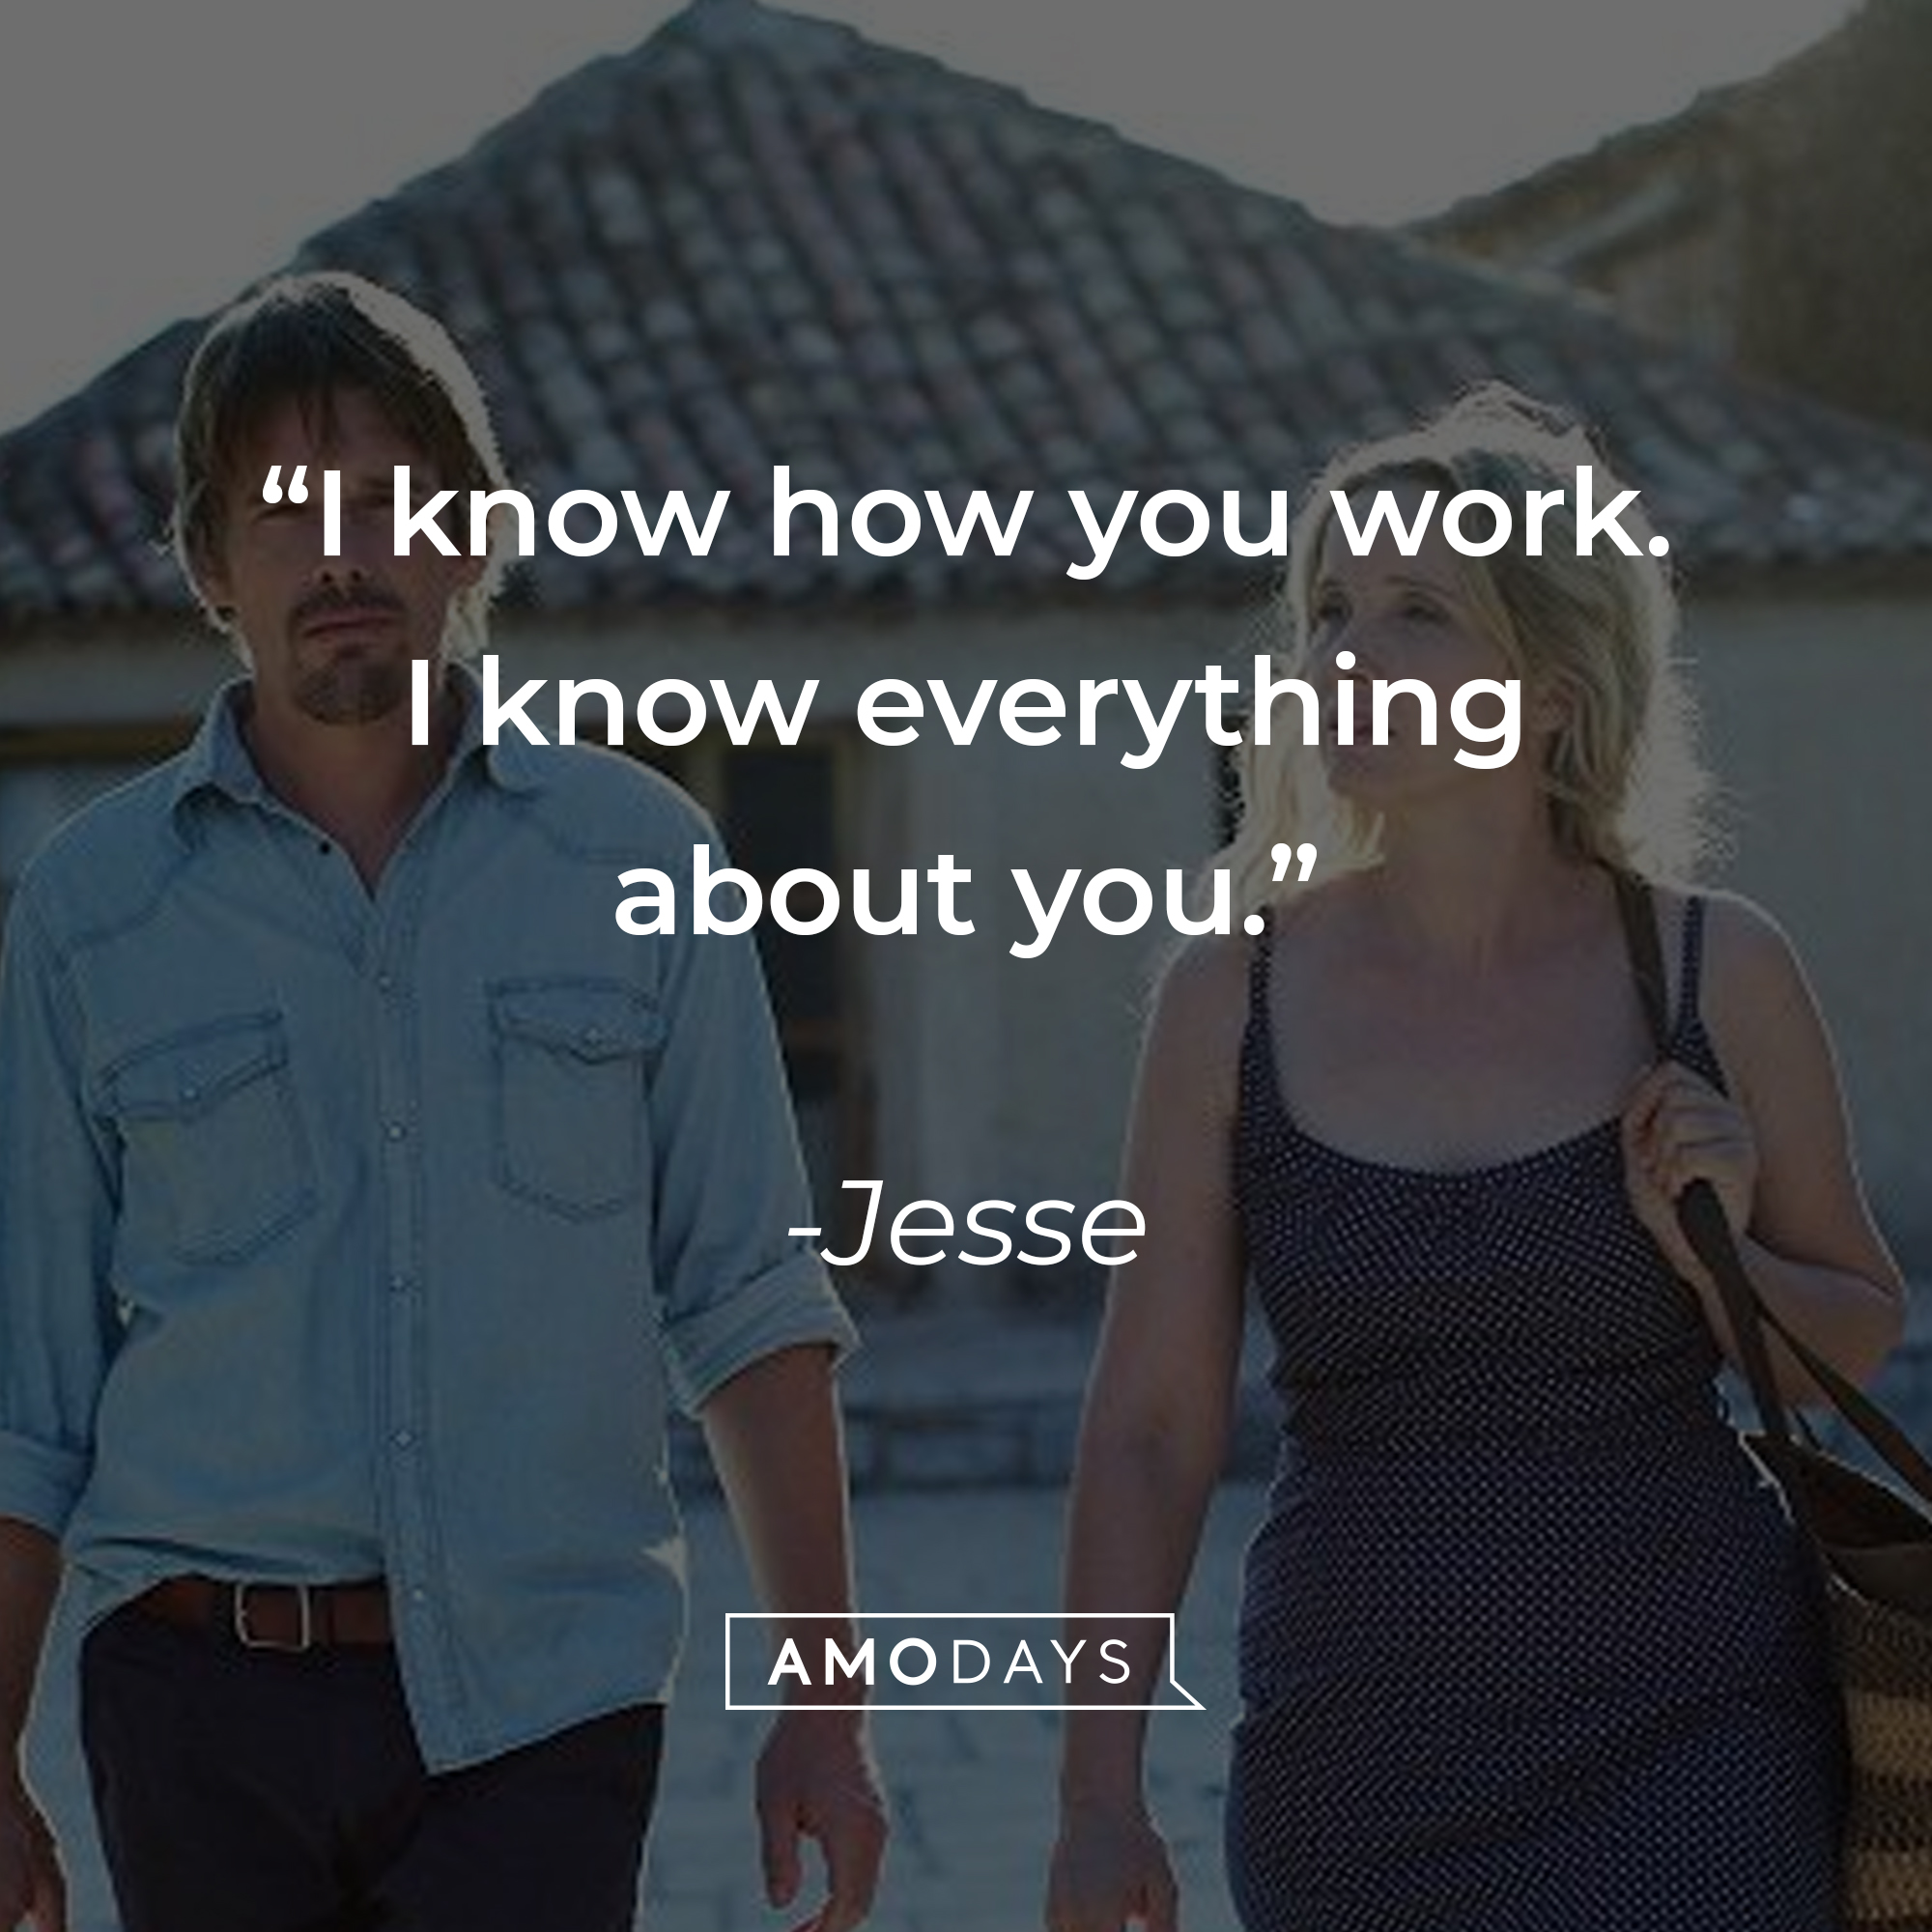 Jesse, with two other characters: “I know how you work. I know everything about you.” │Source: facebook.com/BeforeMidnightFilm